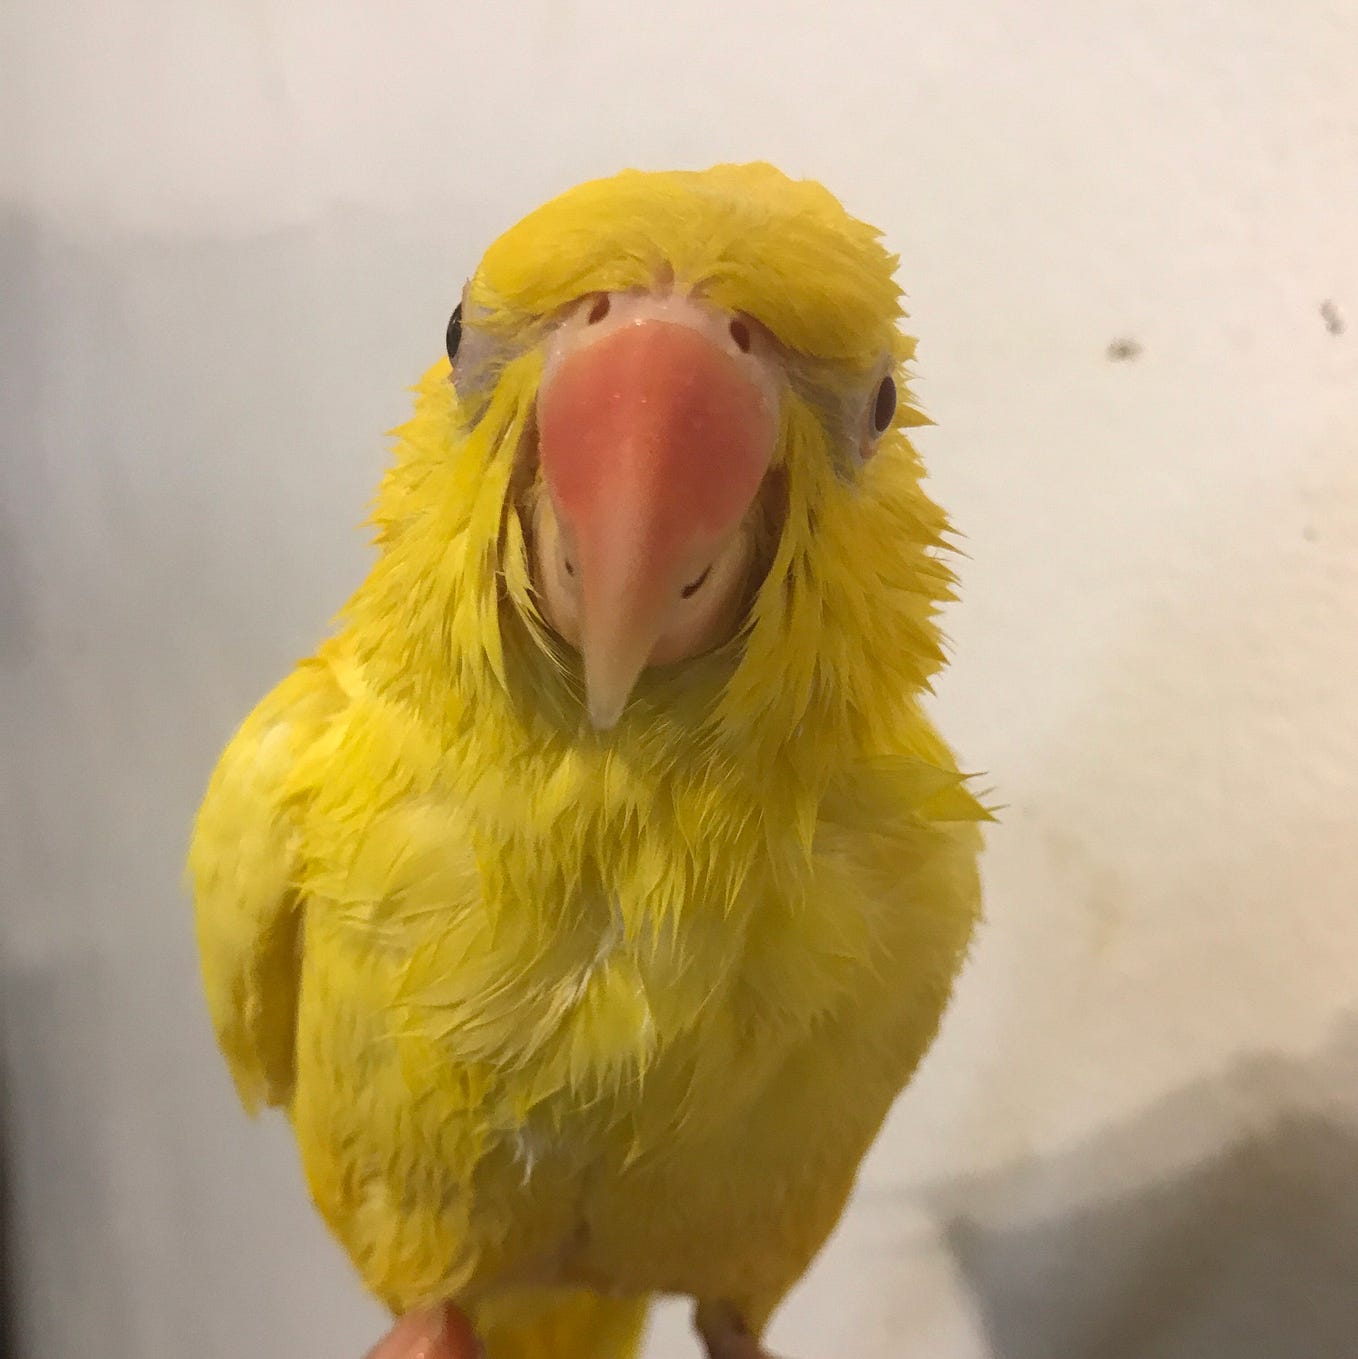 6 Things I Learned From My Parrot